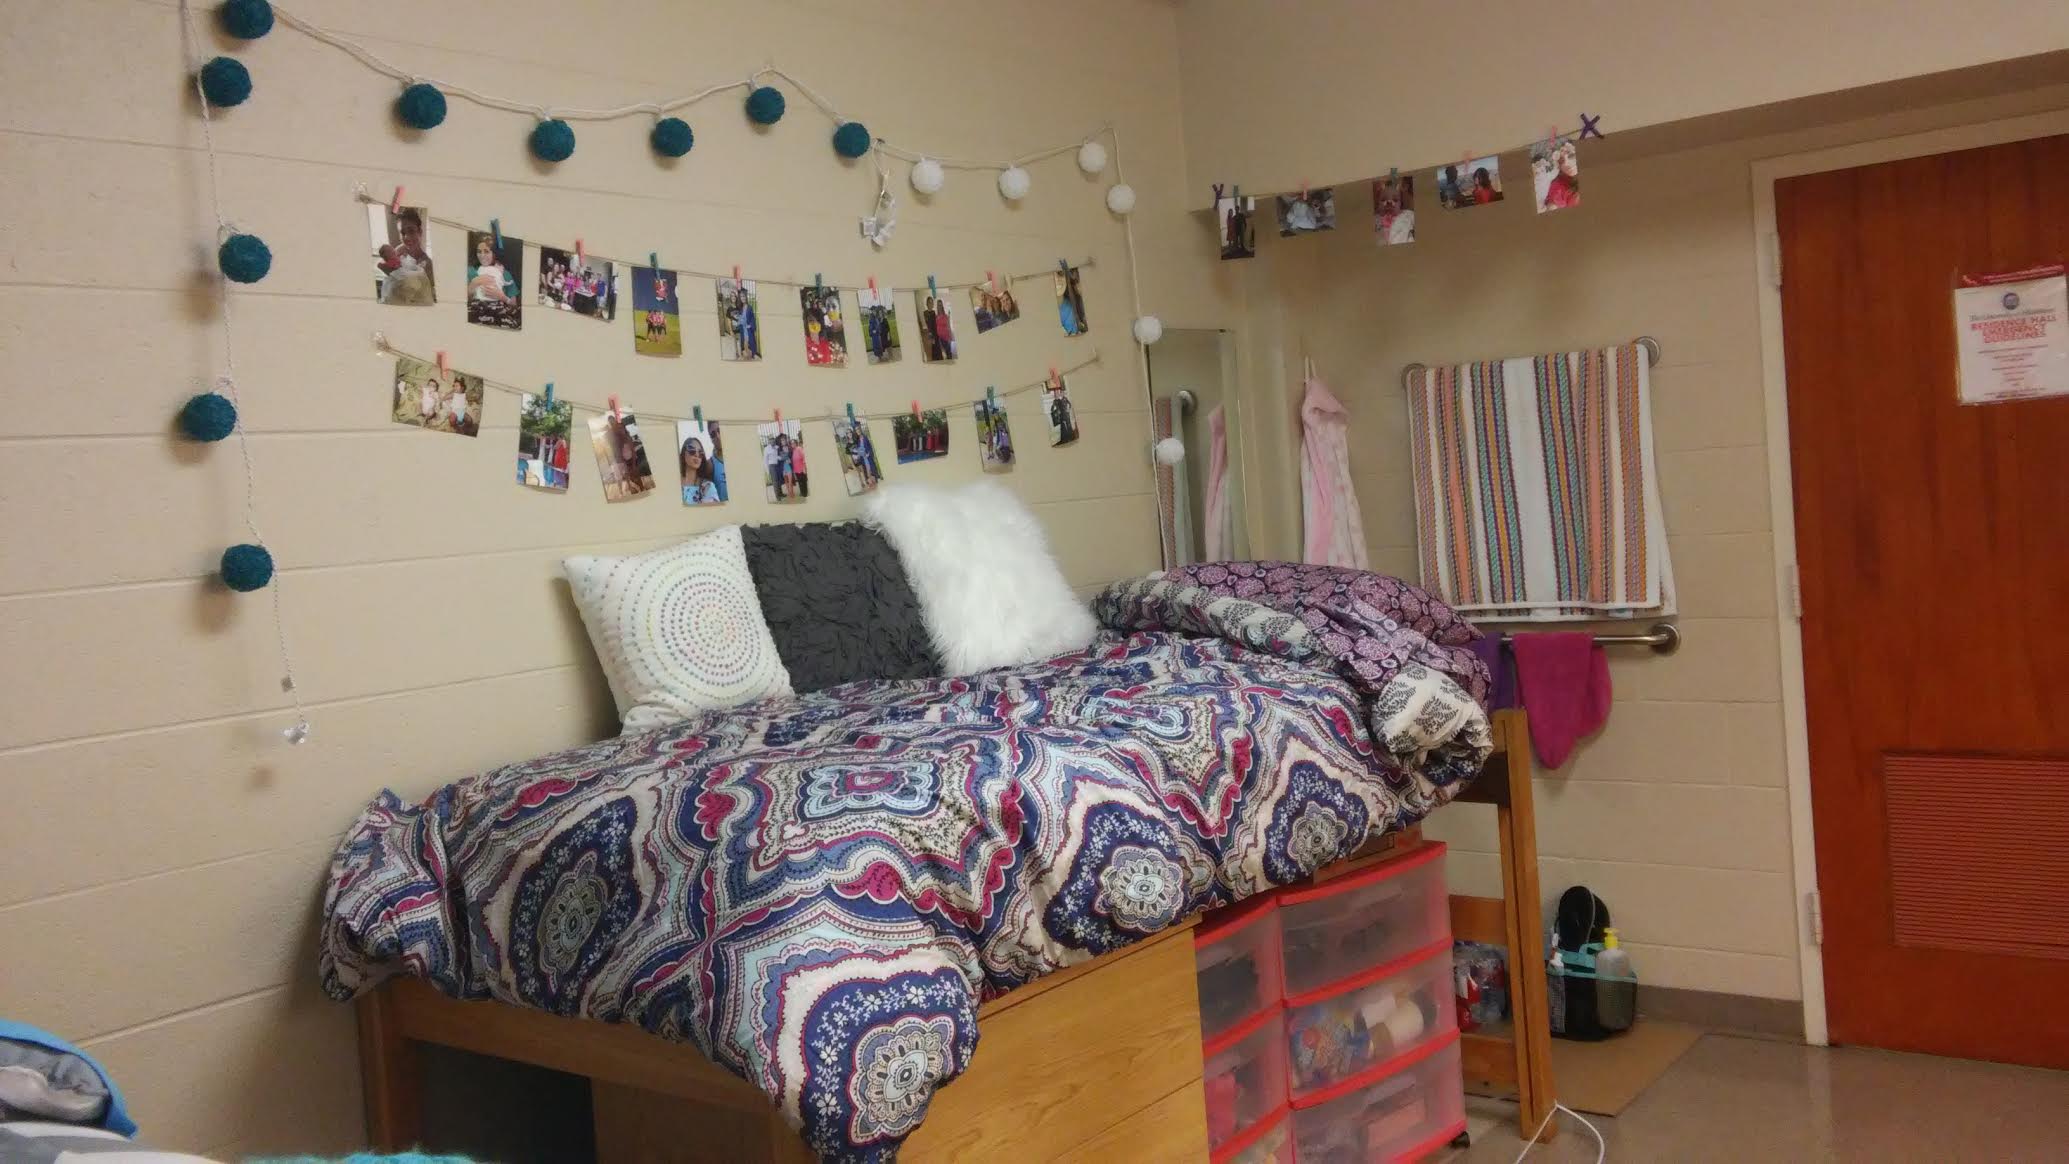 Posh Ole Miss Dorms: Over-the-Top or Fabulous? - HottyToddy.com